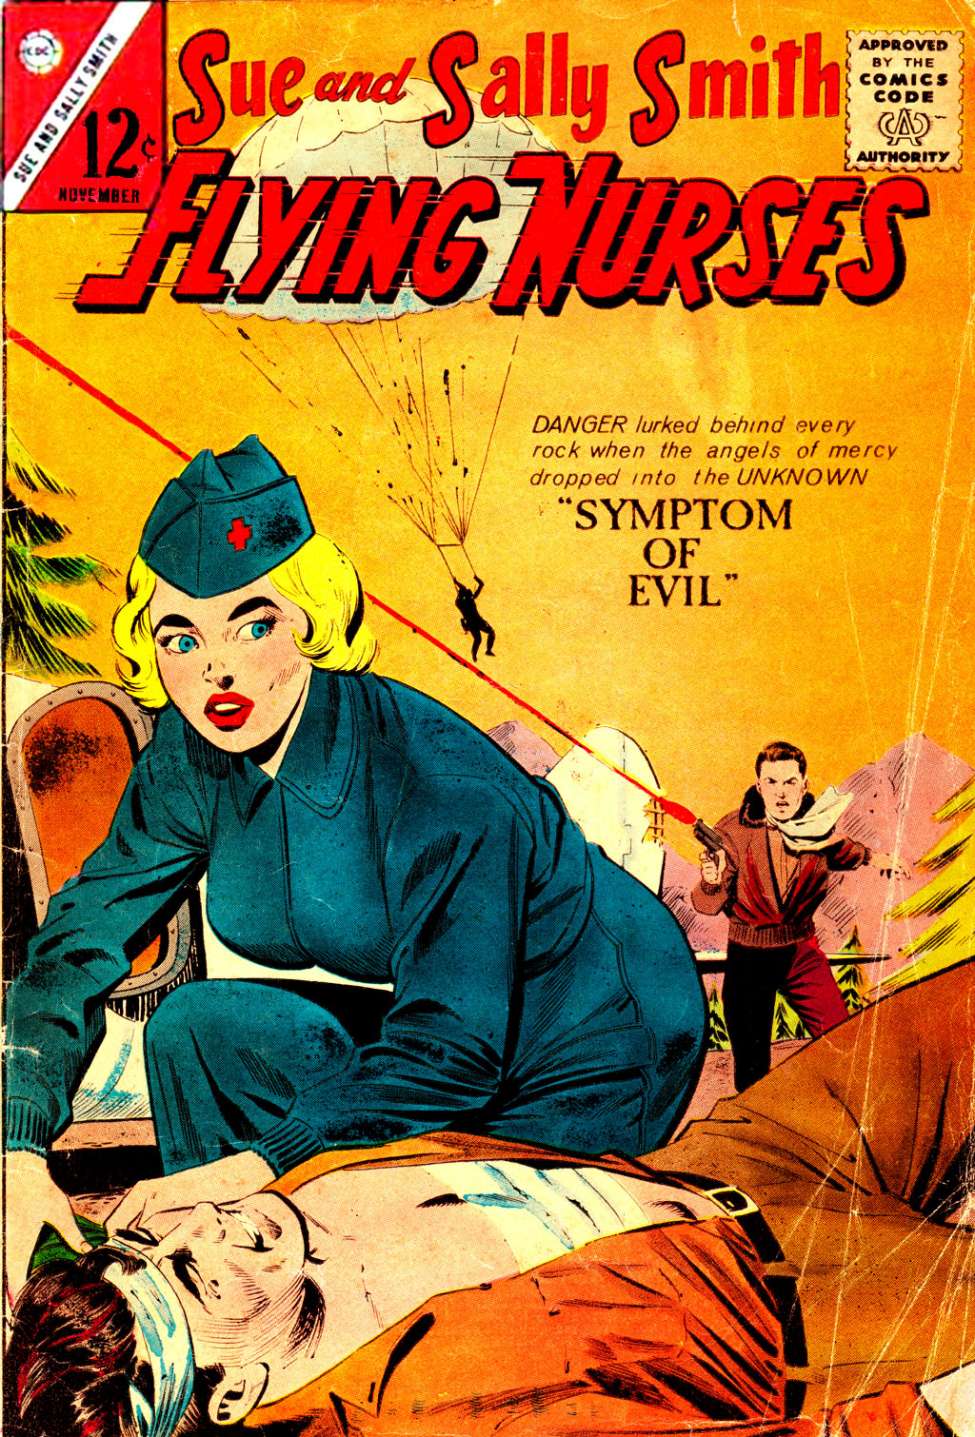 Comic Book Cover For Sue and Sally Smith, Flying Nurses 54